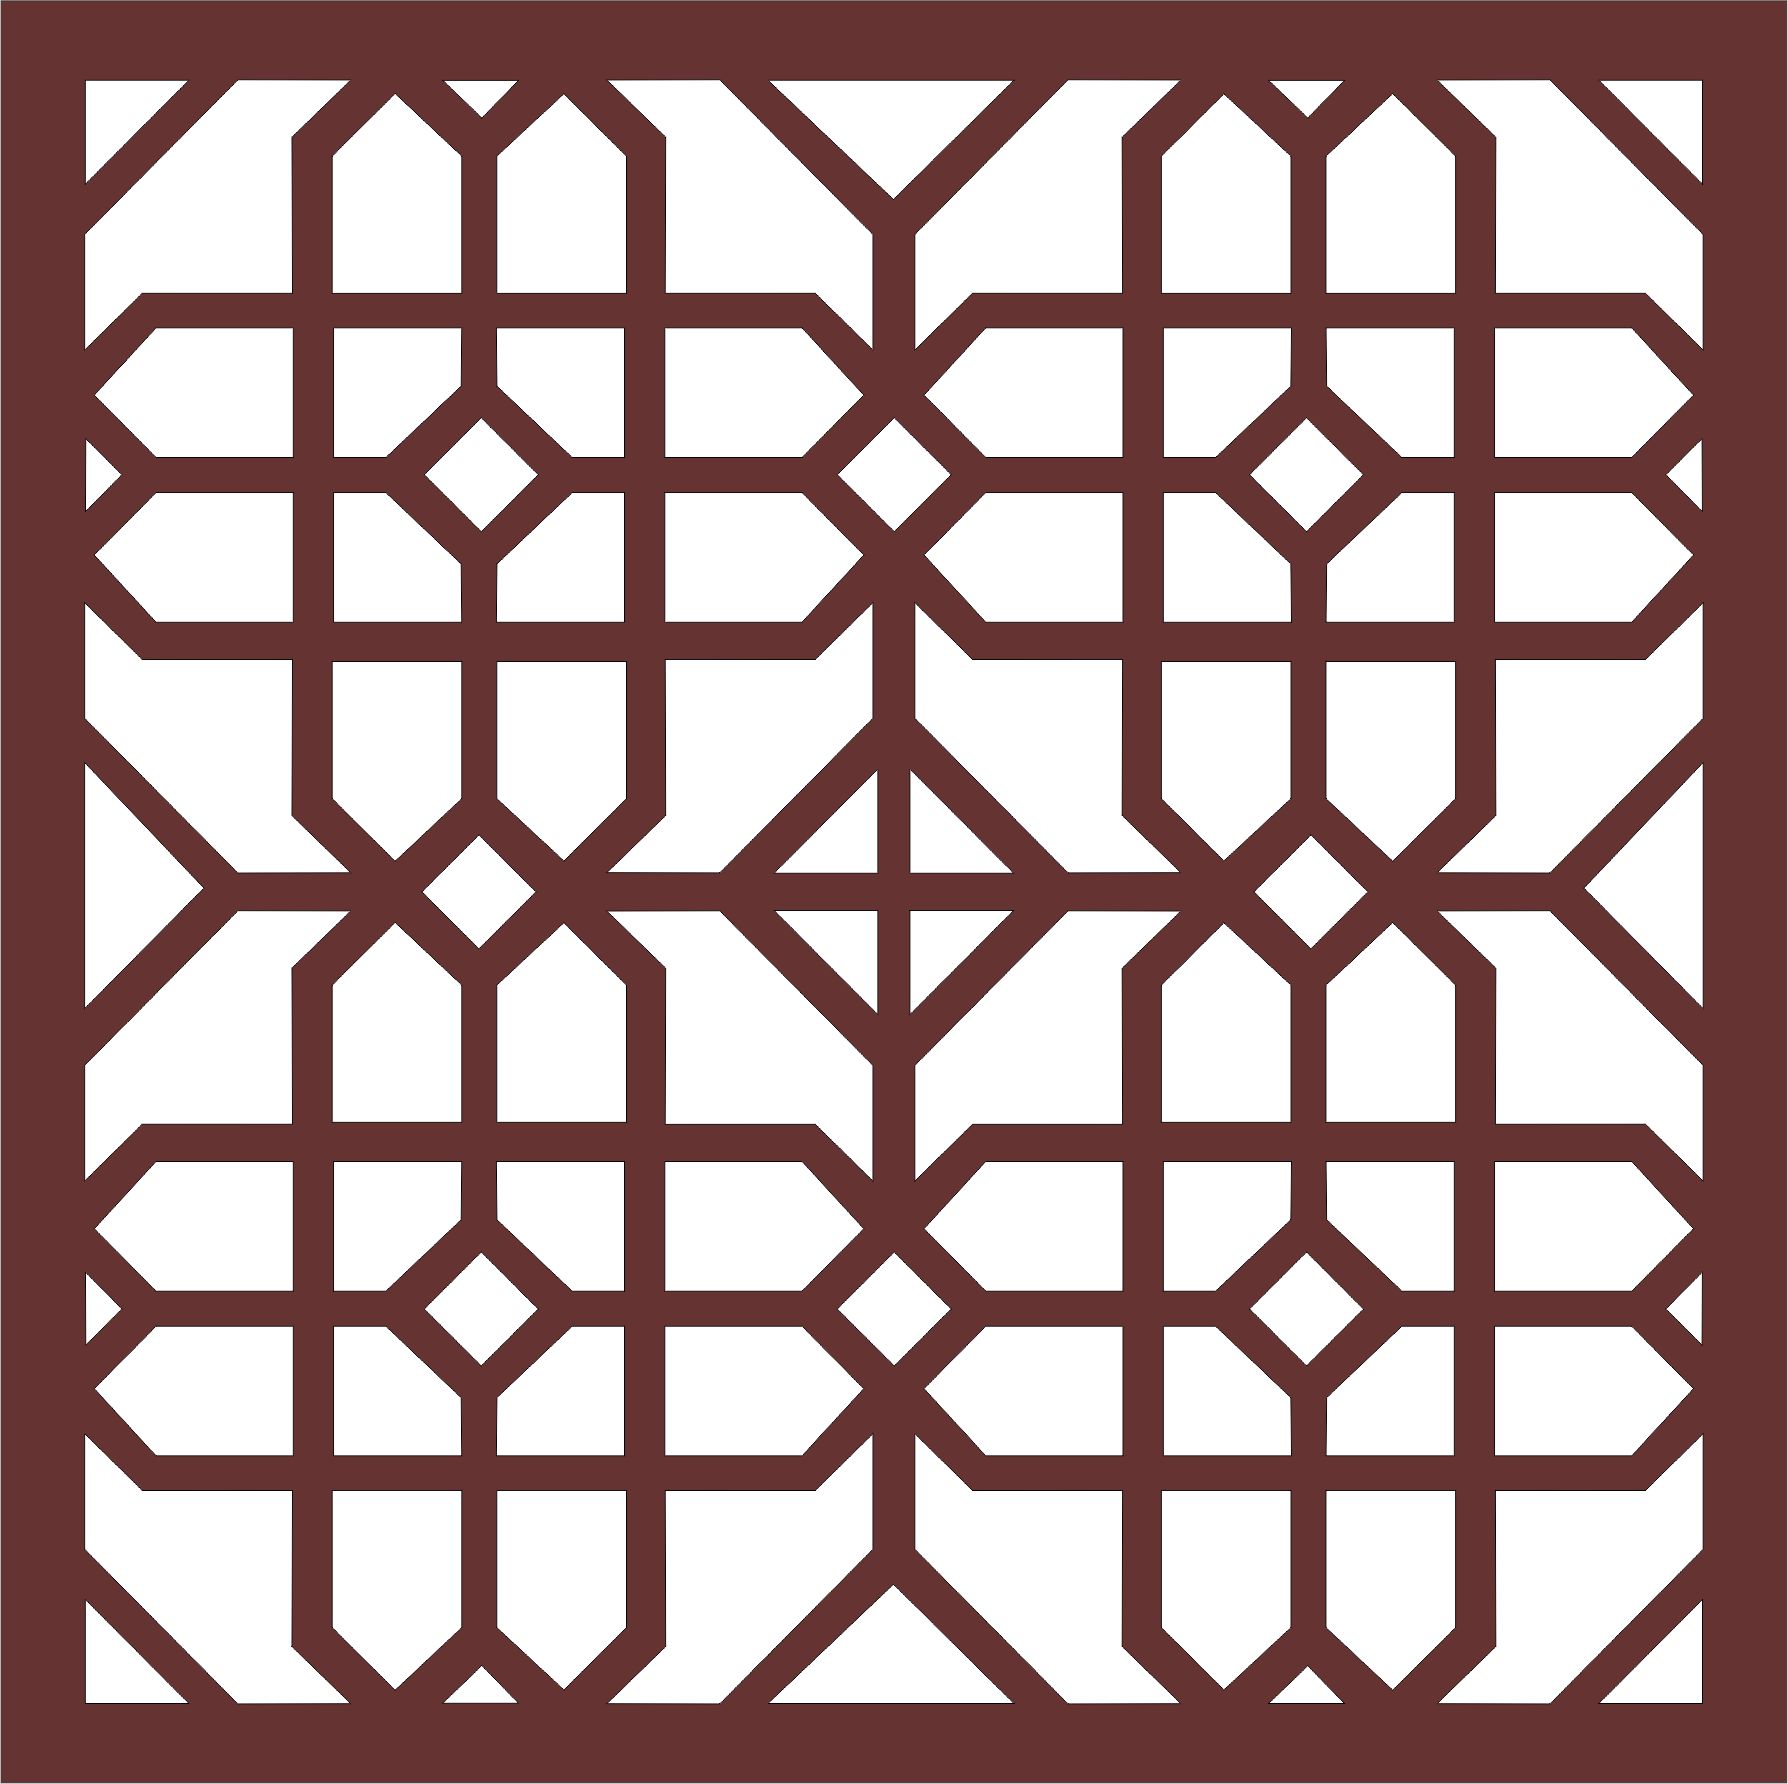 Laser Cut Window Grill Floral Seamless Panel Free CDR Vectors Art